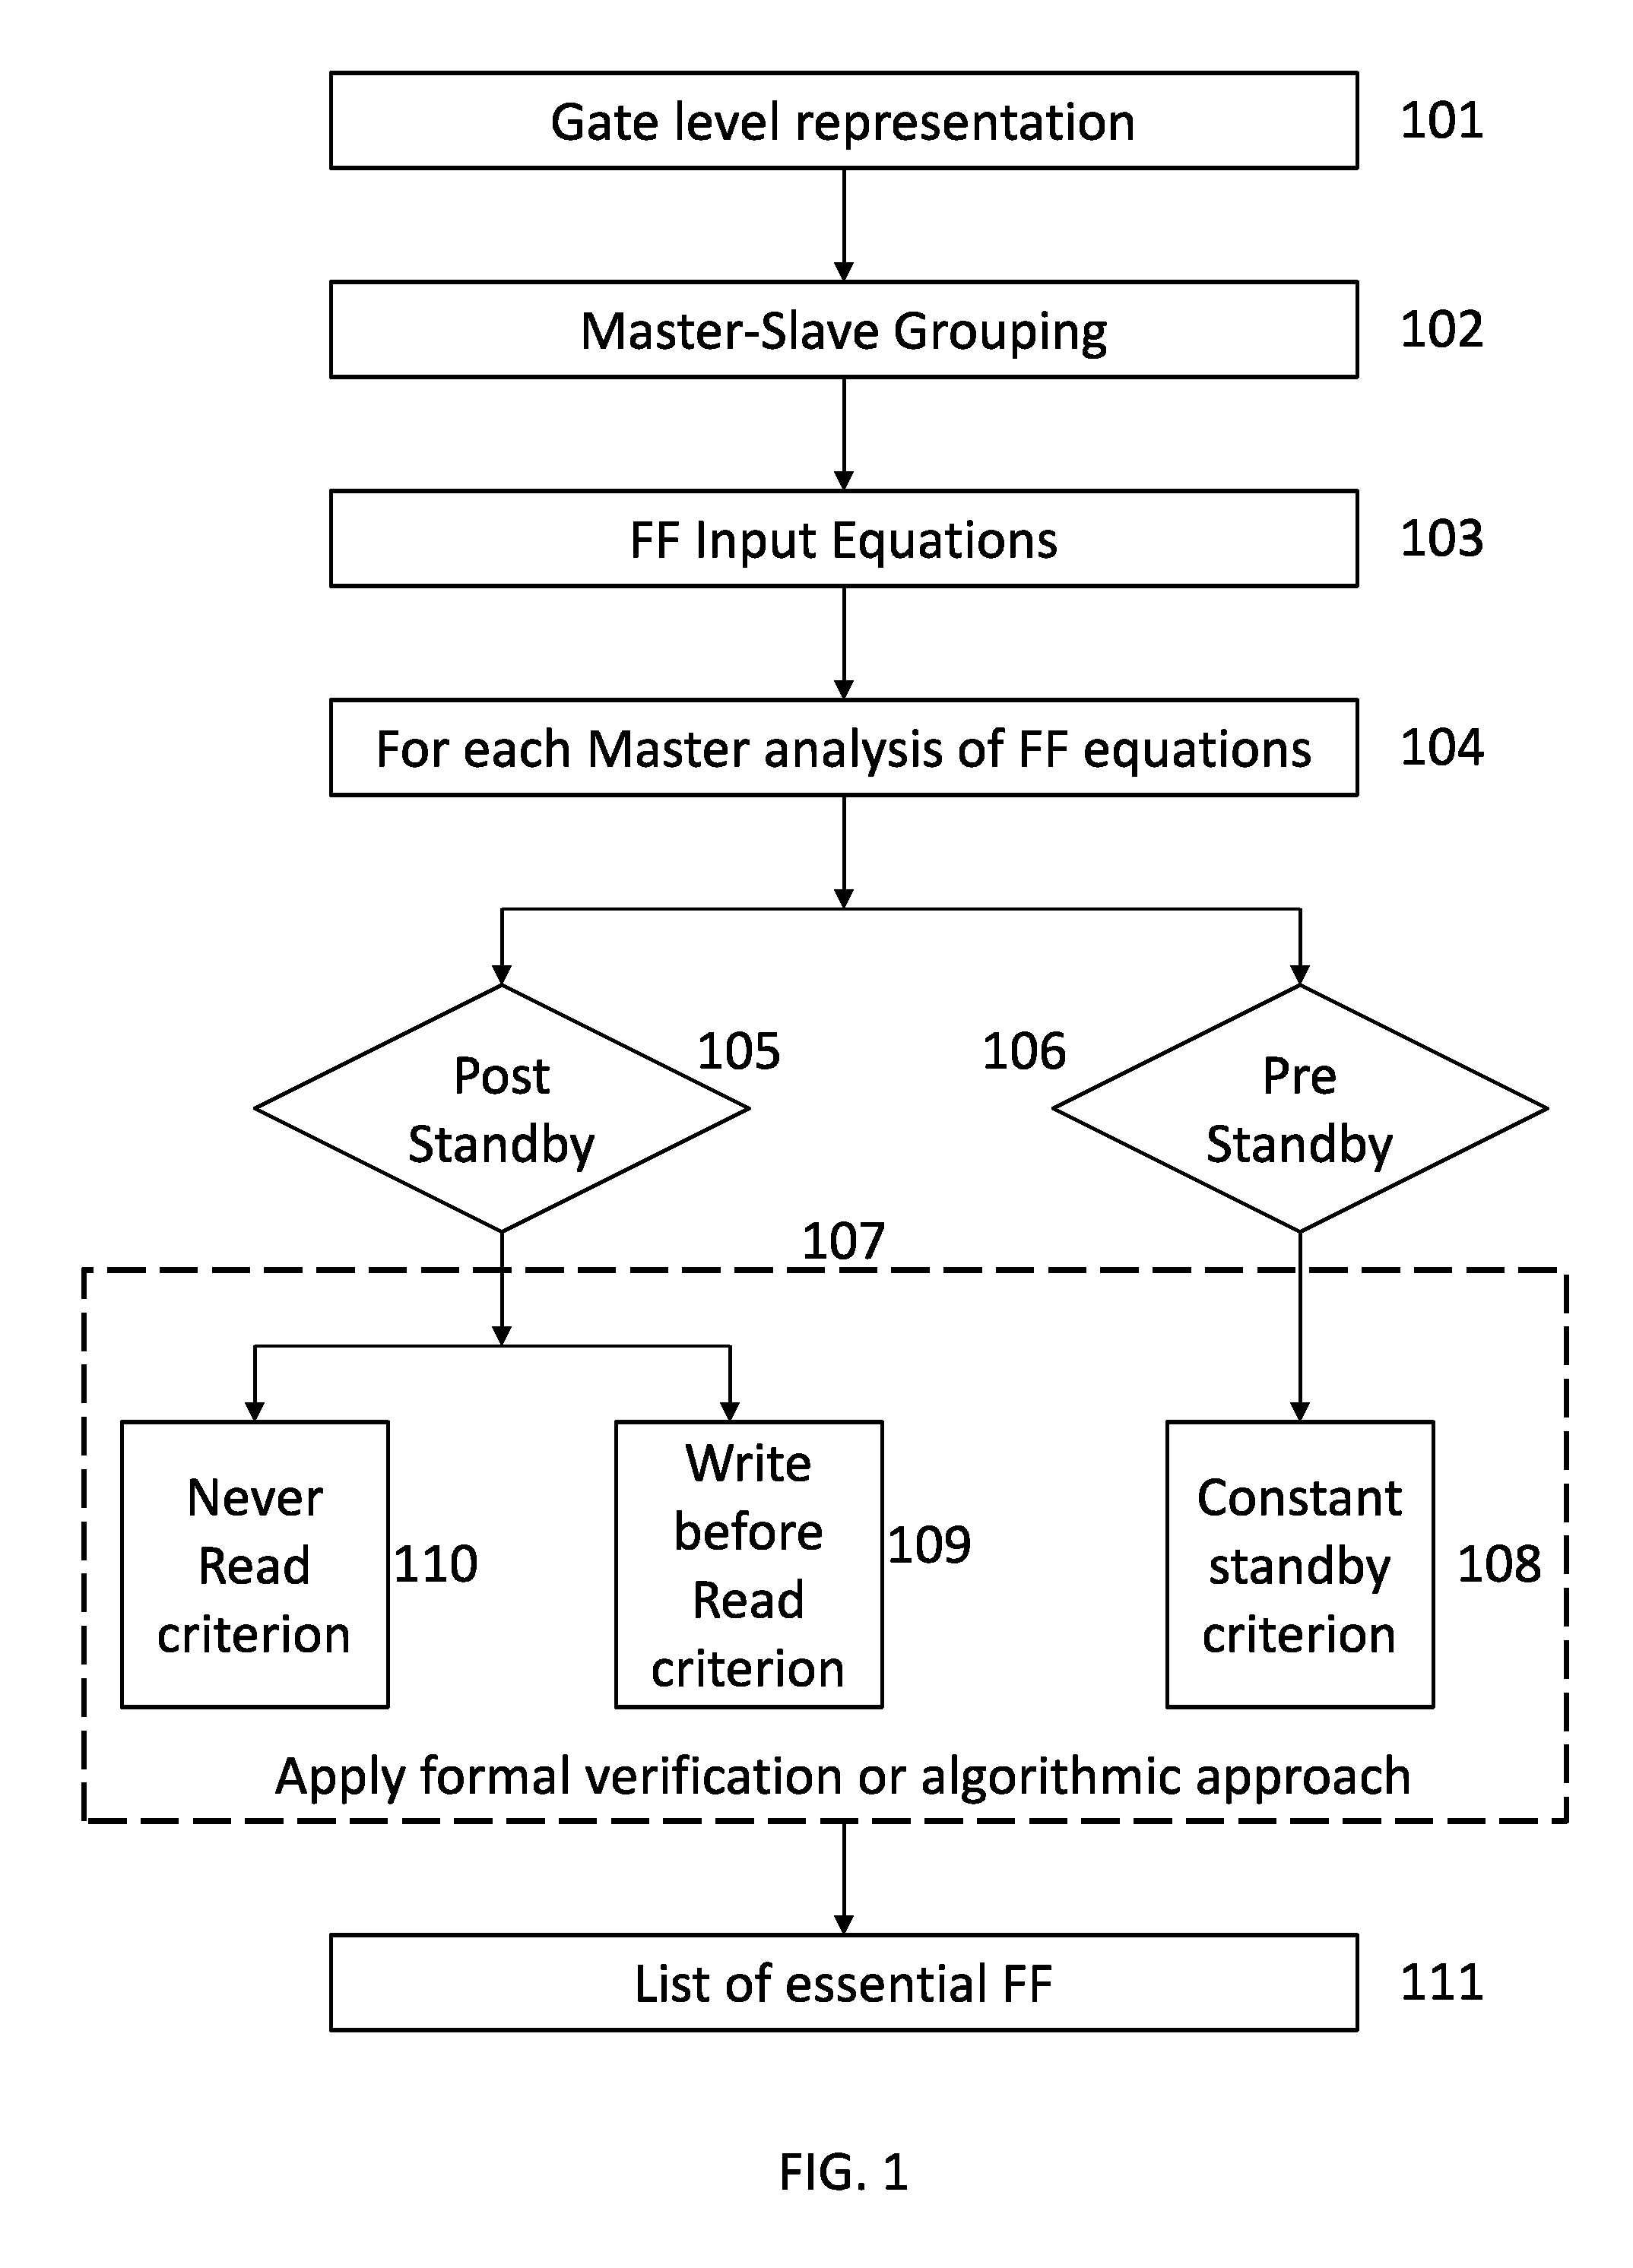 Method for finding non-essential flip flops in a VLSI design that do not require retention in standby mode